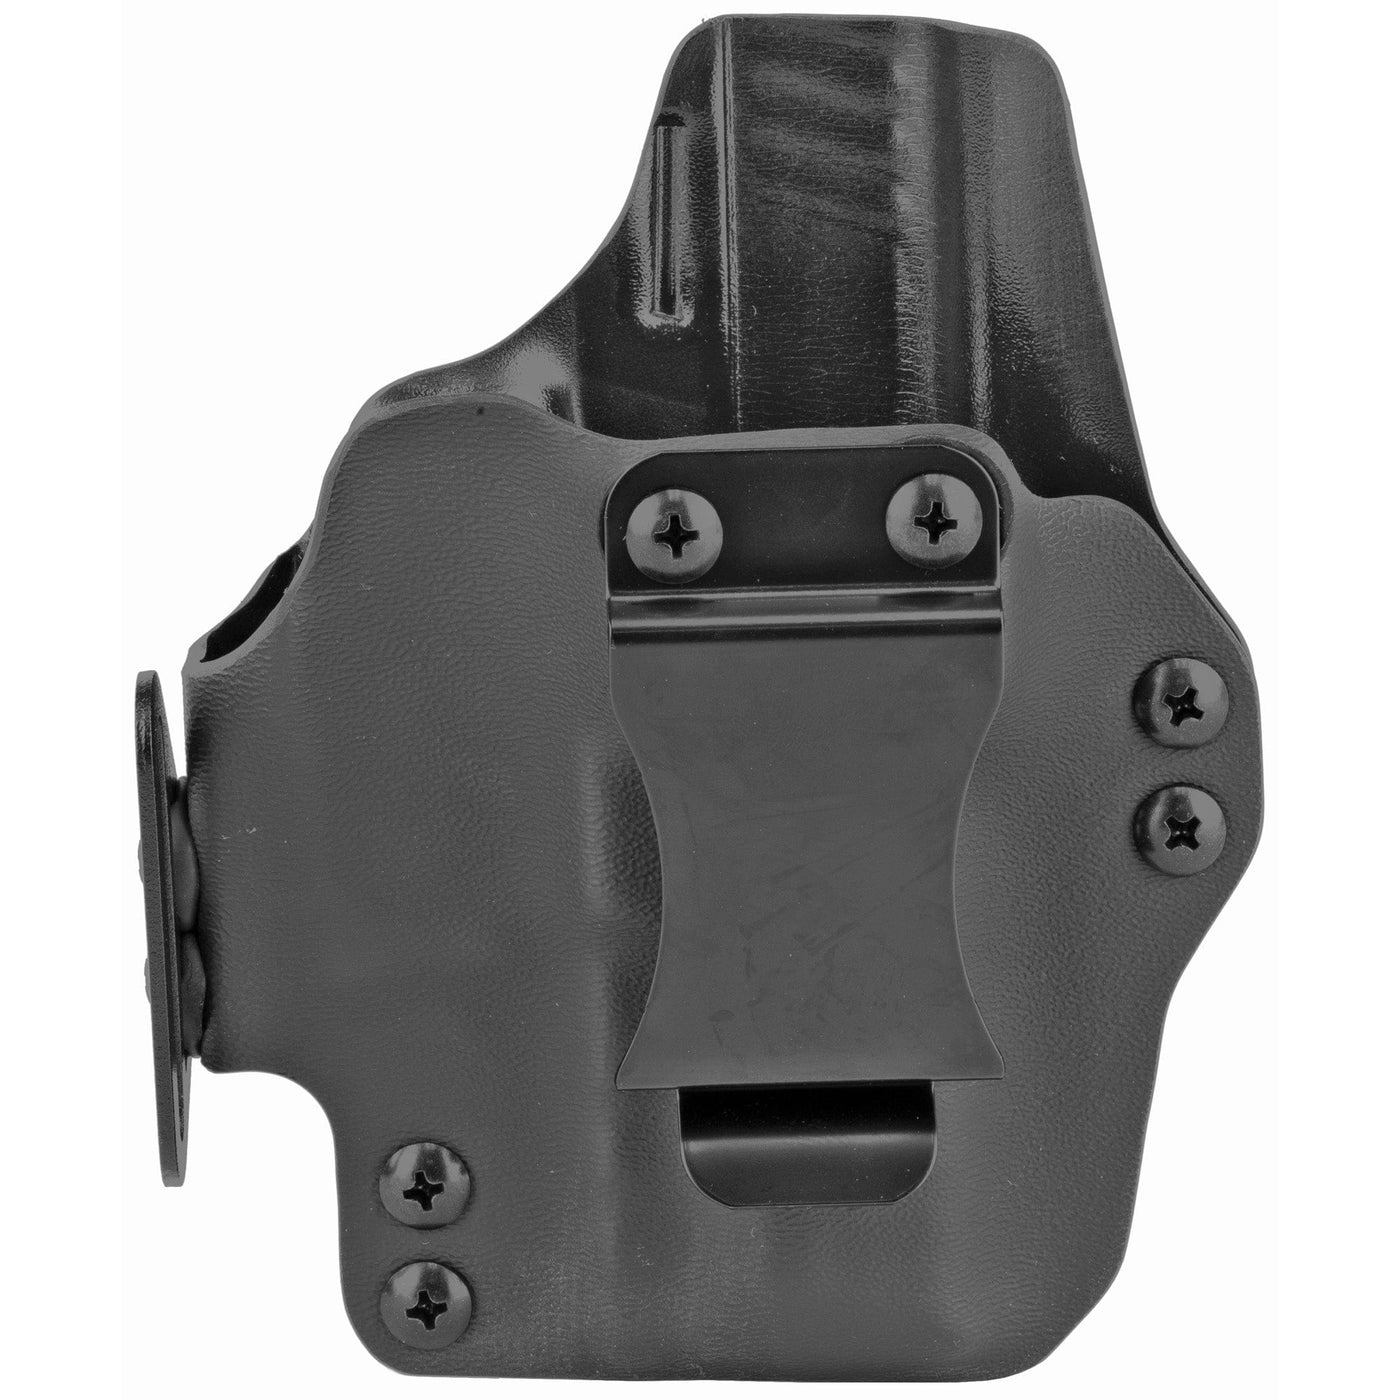 BlackPoint Tactical Blk Pnt Dual Point Aiwb H&k Vp9 Sk Holsters